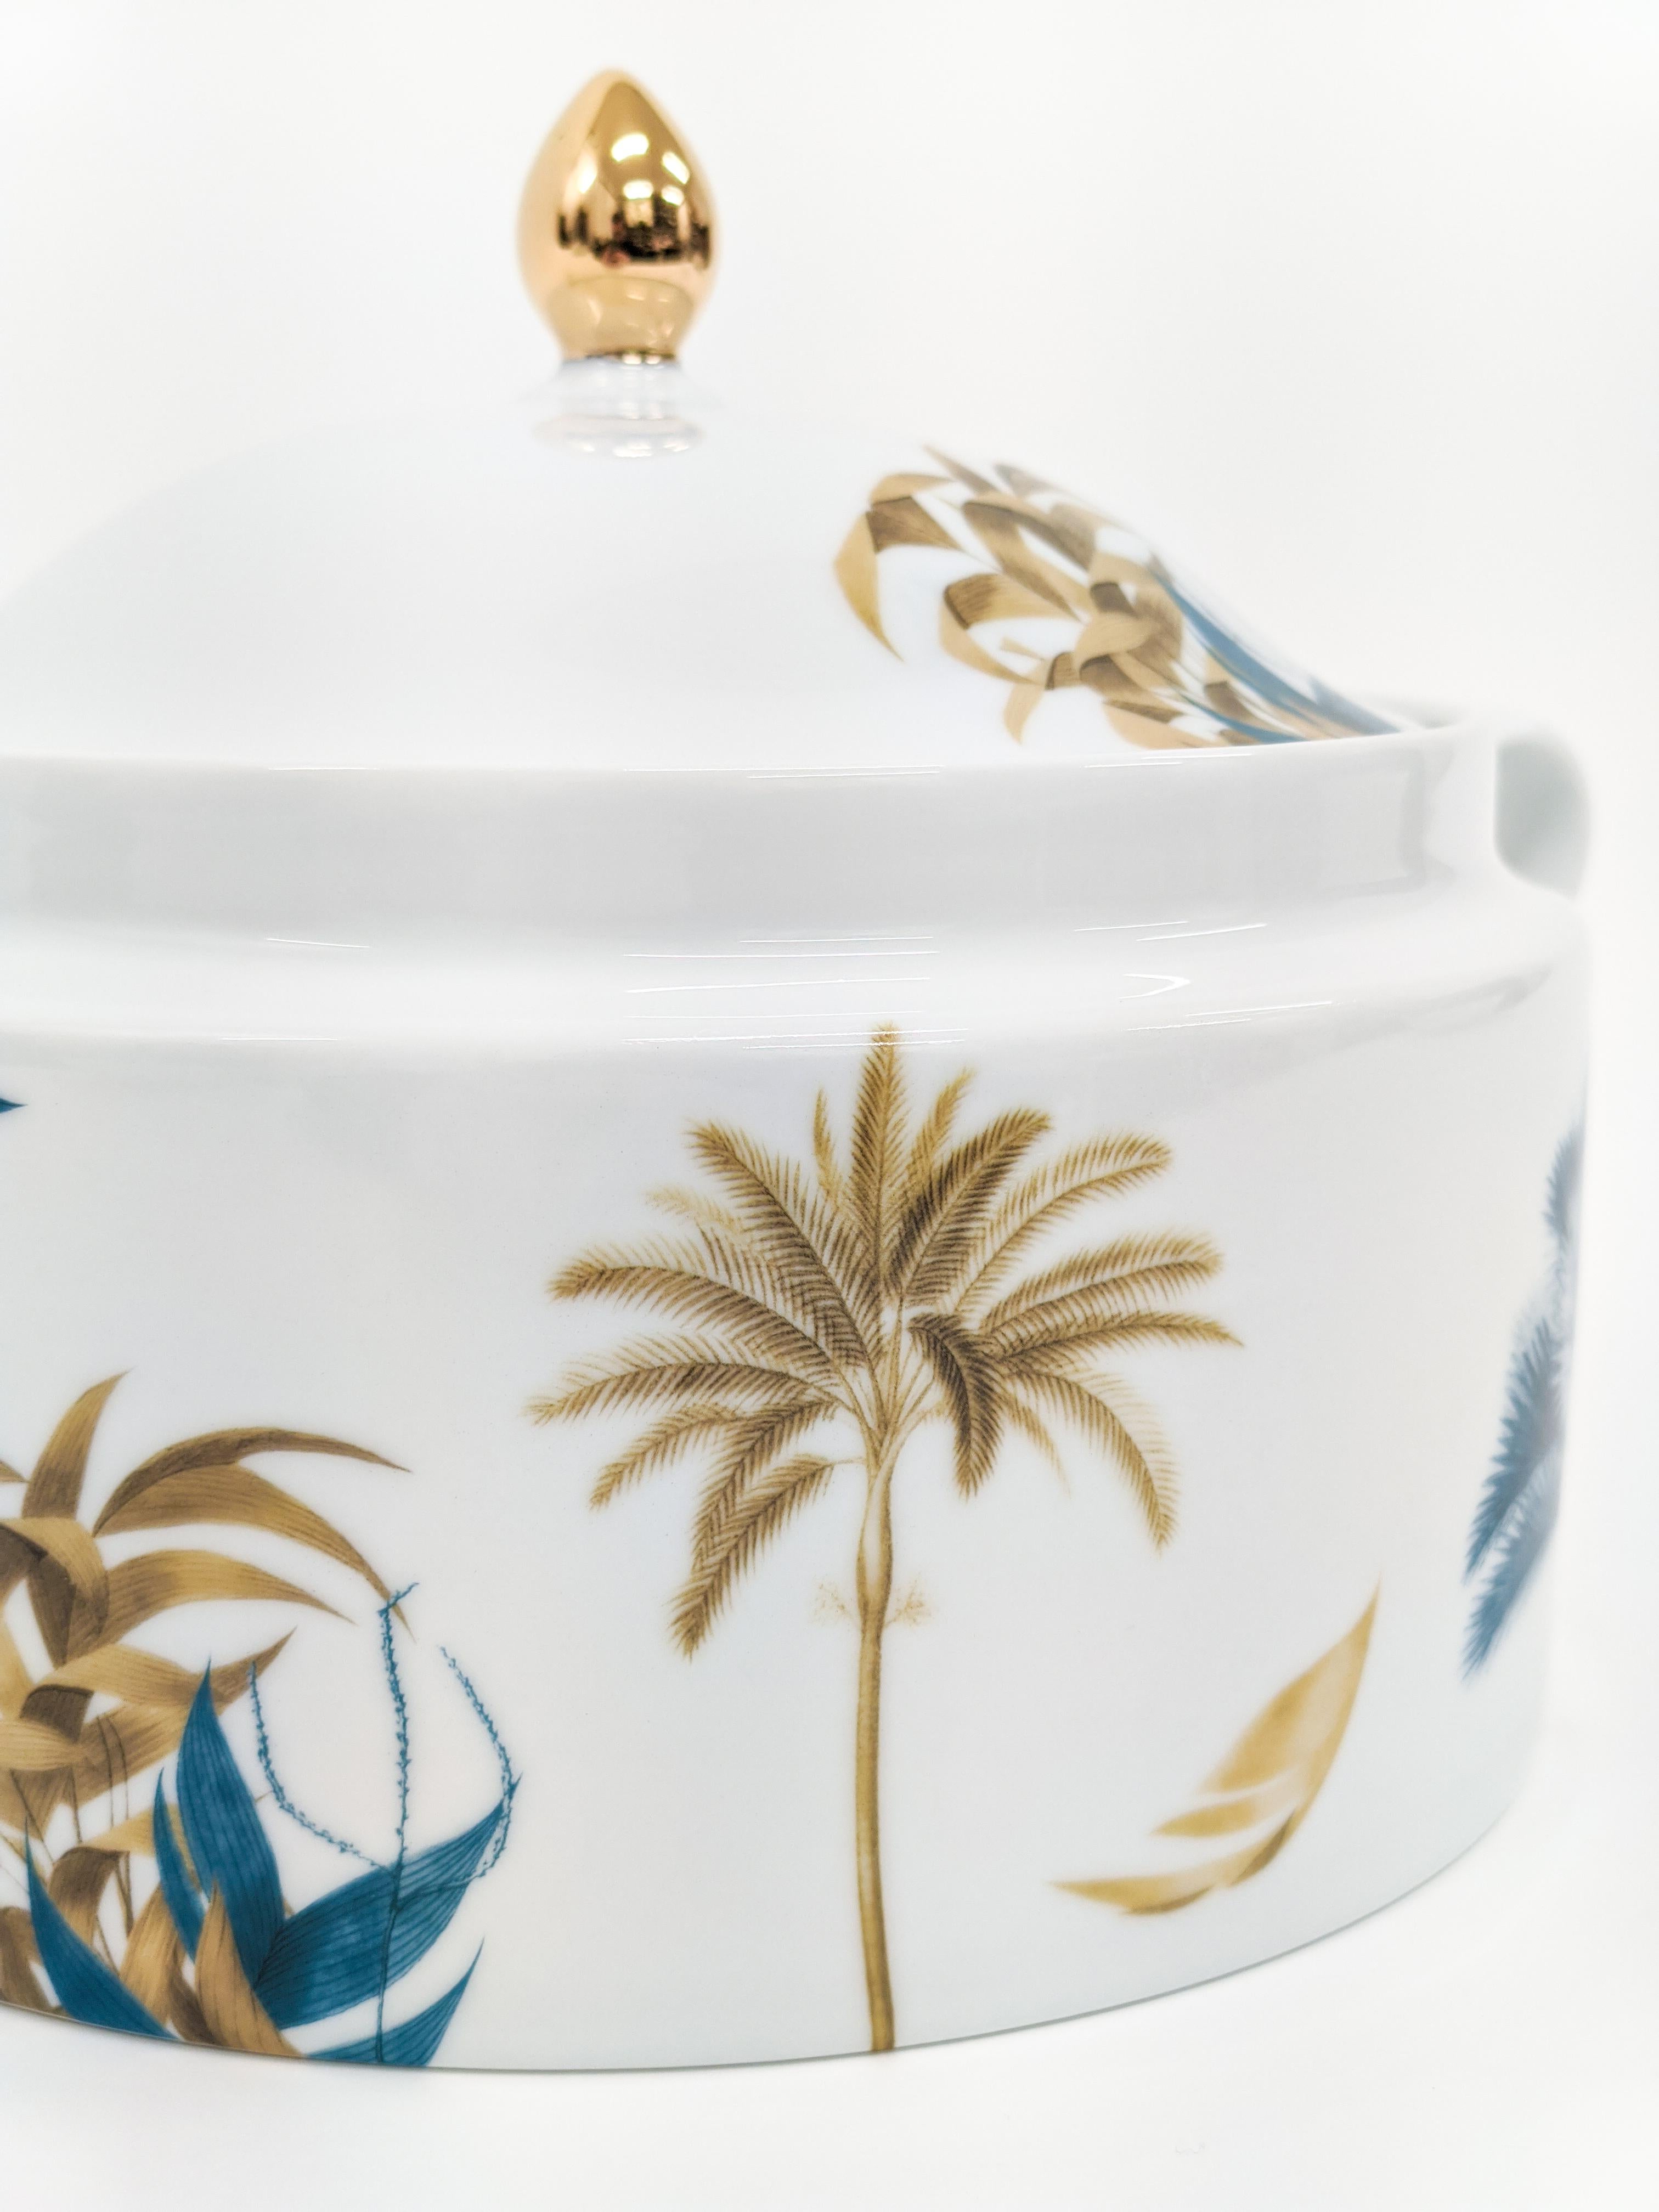 Other Las Palmas, Contemporary Decorated Porcelain Tureen by Vito Nesta For Sale